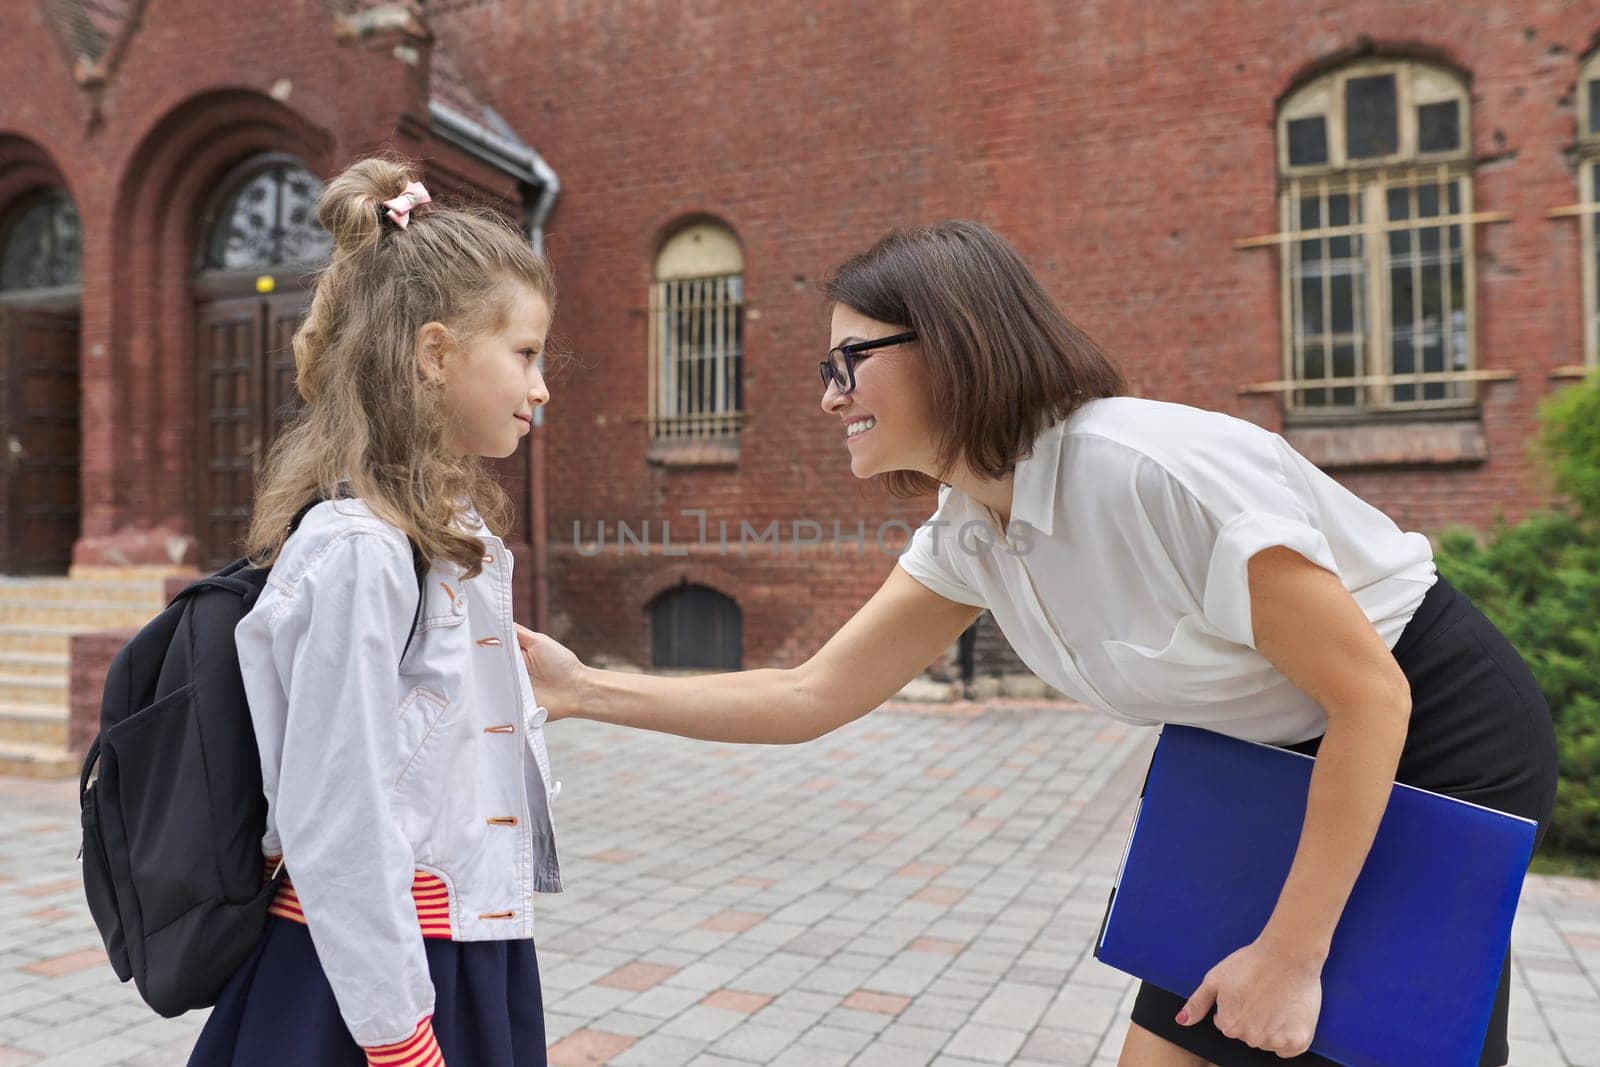 Outdoor portrait of teacher woman and little student girl together. Teacher talking with child near school building. Back to school, start of classes